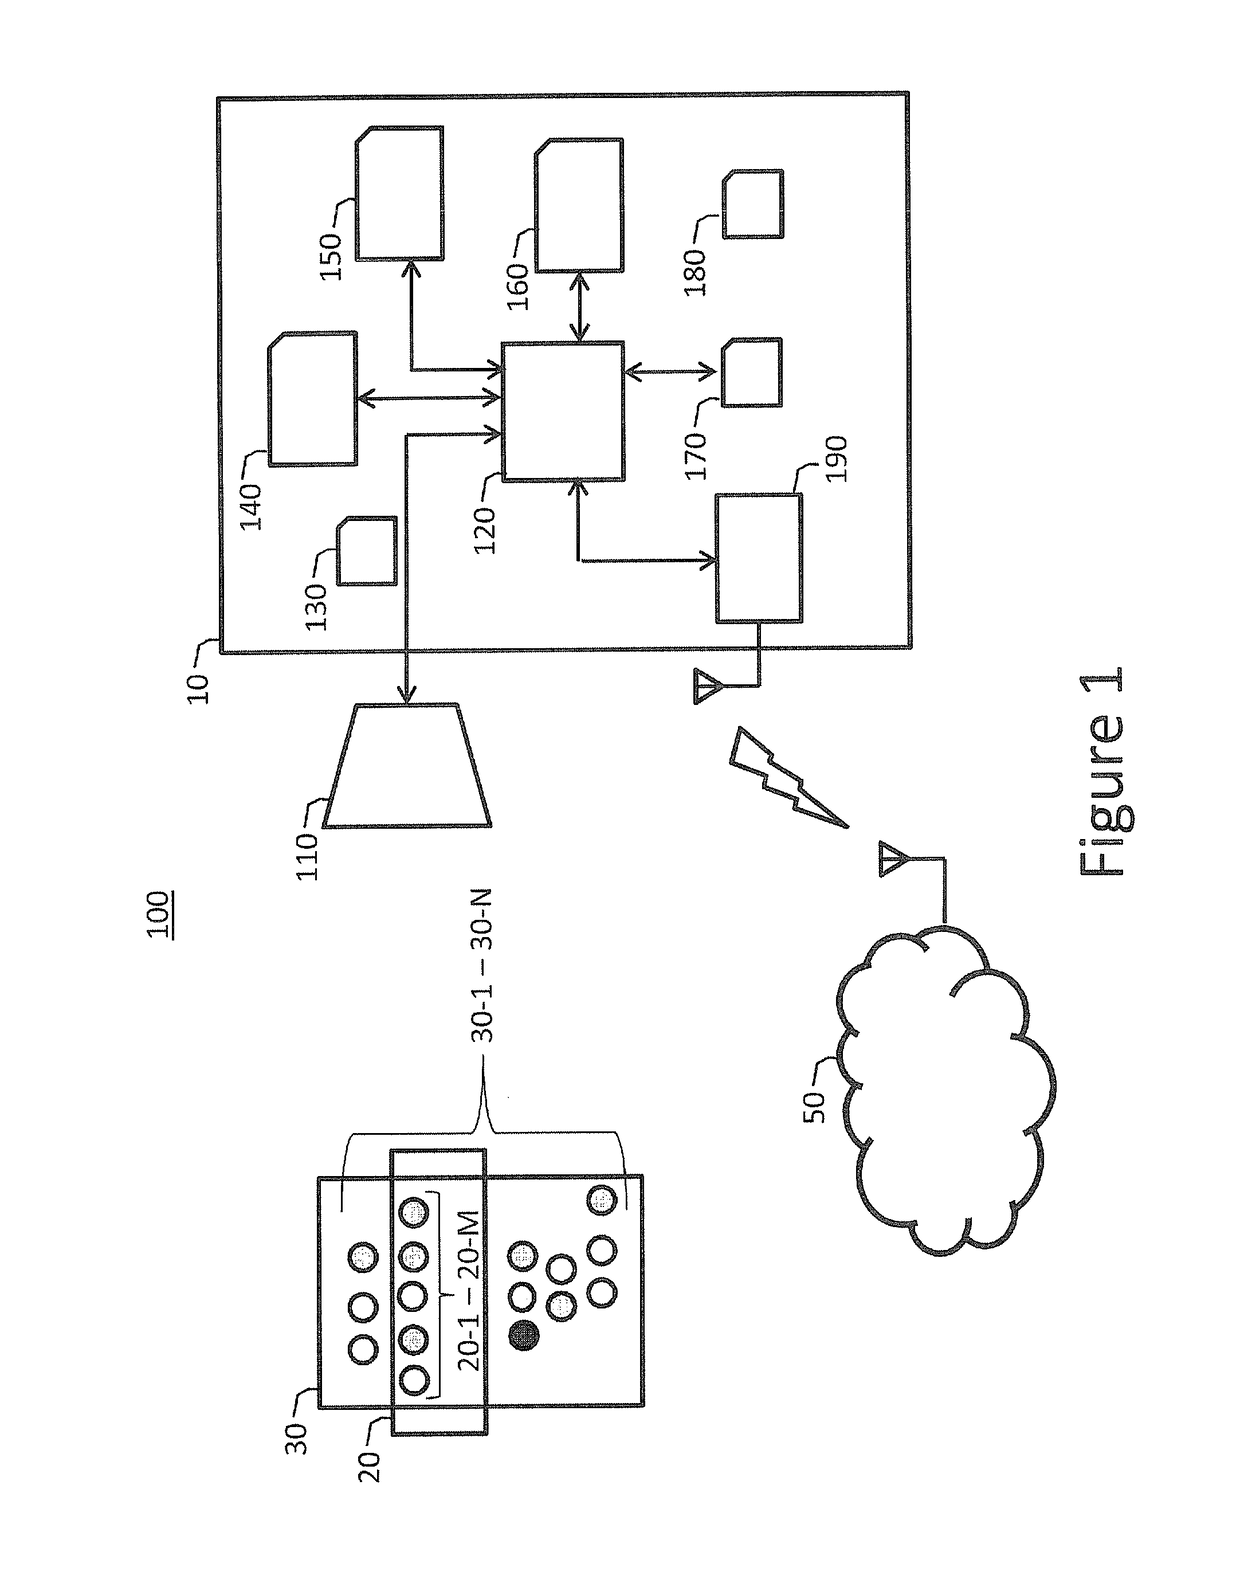 Method and system for automated visual analysis of a dipstick using standard user equipment